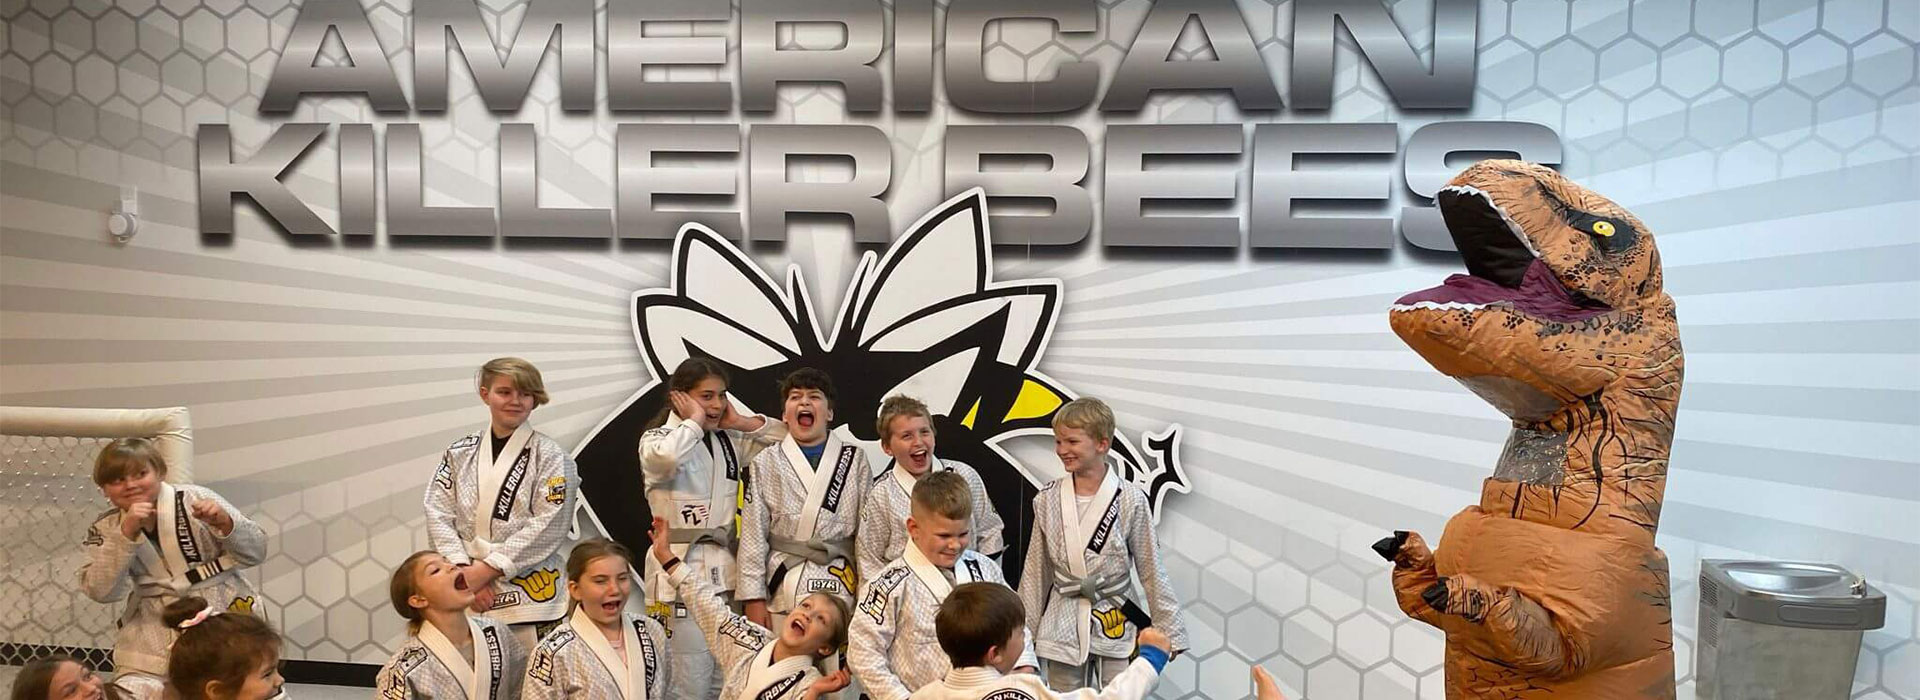 Martial arts students at the American Killer Bees association near me in Myrtle Beach, FL